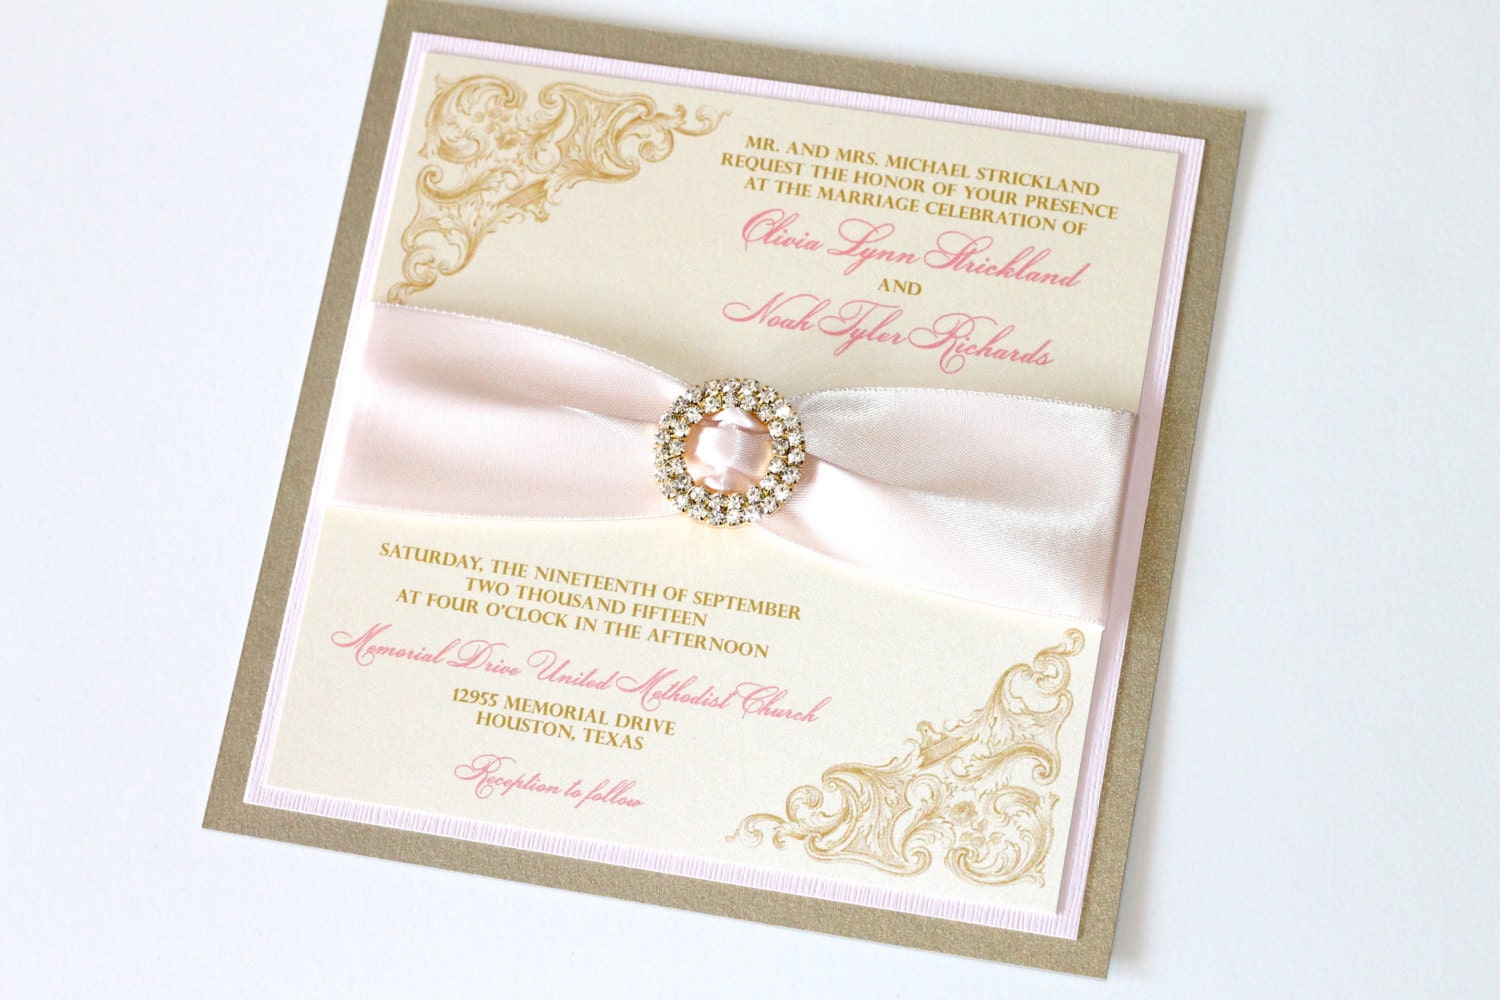 Olivia Couture Crystal Buckle Wedding Invitation Sample - Blush Pink, Ivory and Gold Leaf